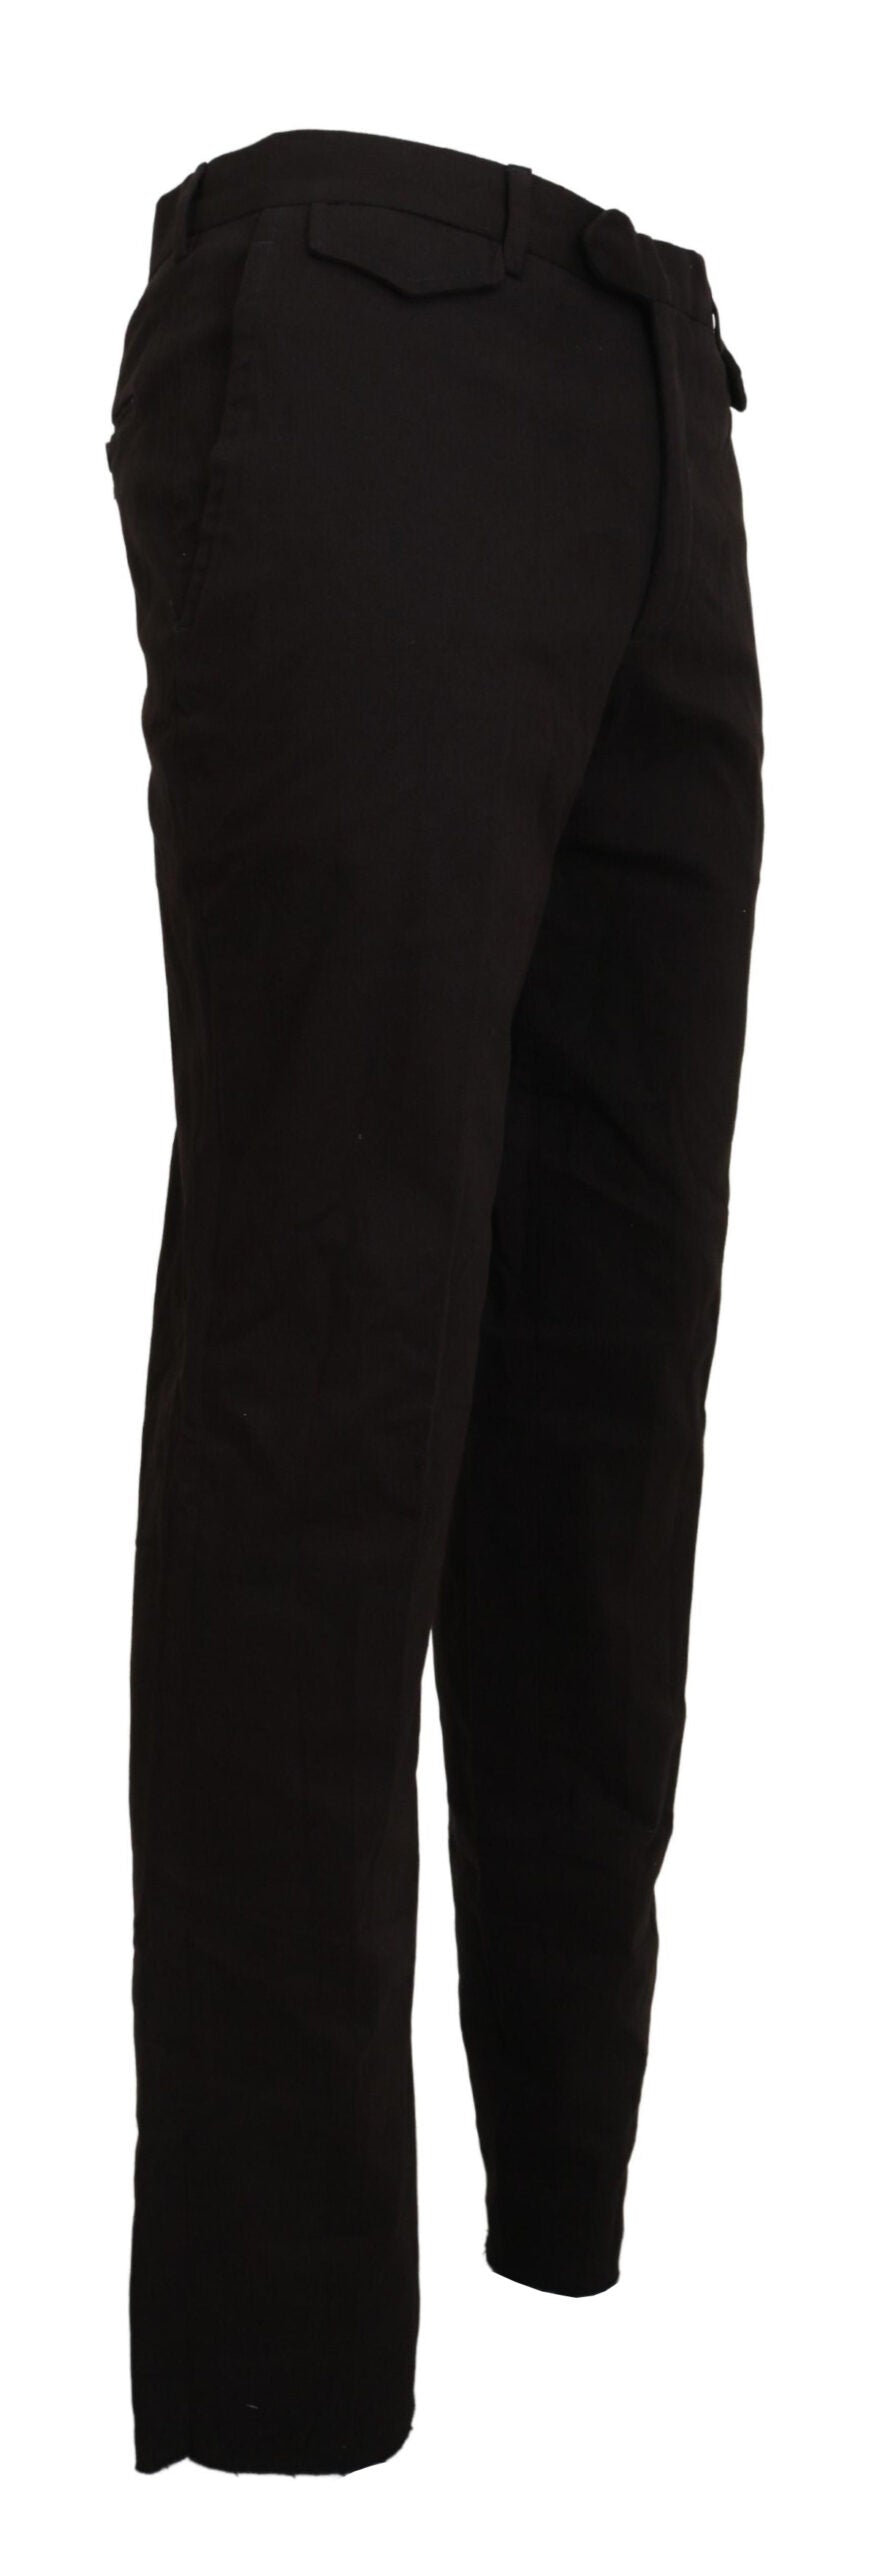 Elegant Brown Cotton Pants for Sophisticated Style